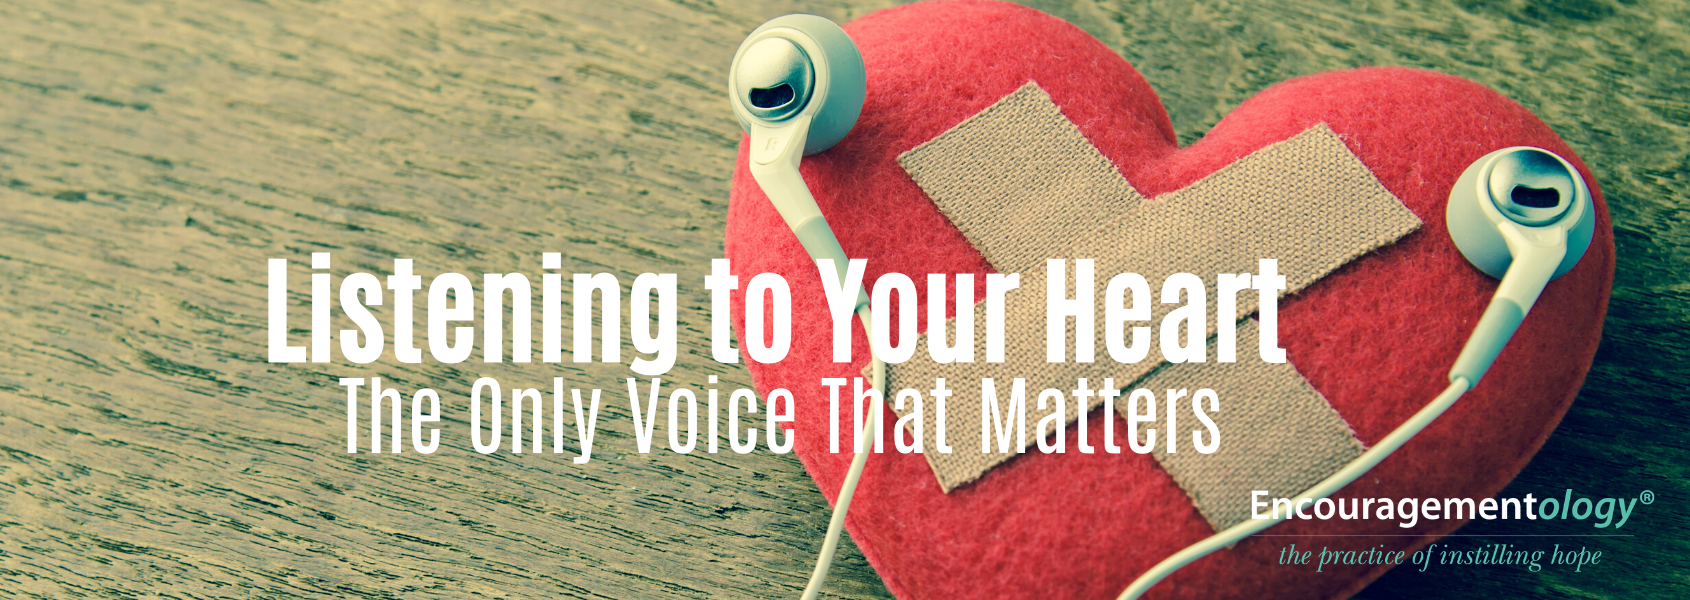 Listening to your heart the only voice that matters